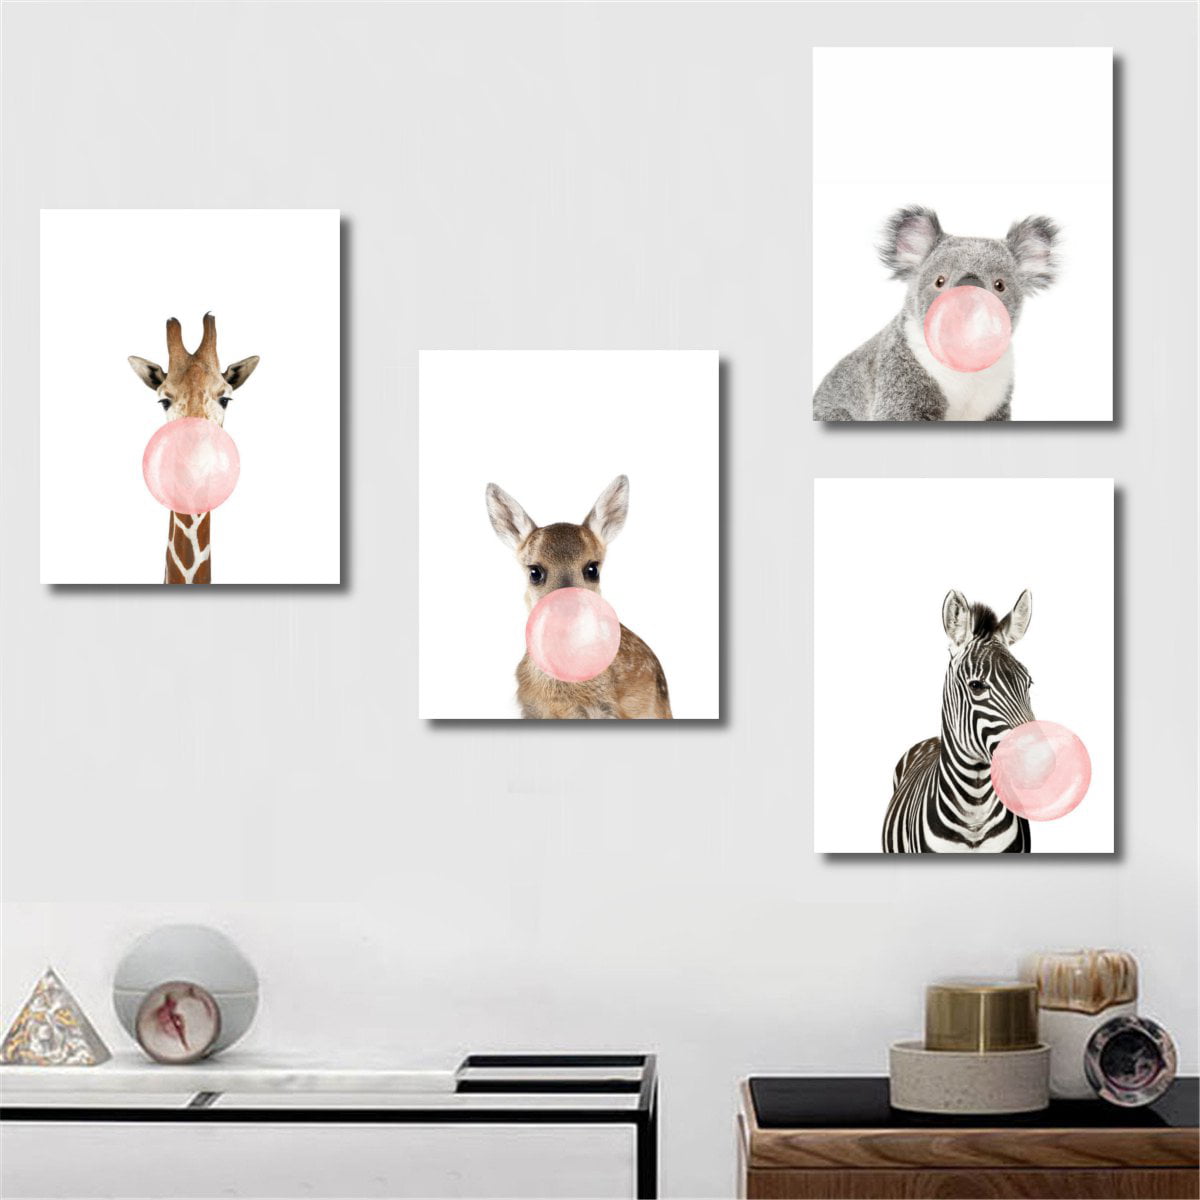 Ciujoy Cartoon Animal Wall Prints Unframed 4 Panels for Kids Room Cute Inspirational Canvas Pictures Art Decoration Posters For Children Bedroom Nursery Home Living Room Bedroom Decor 21x30cm